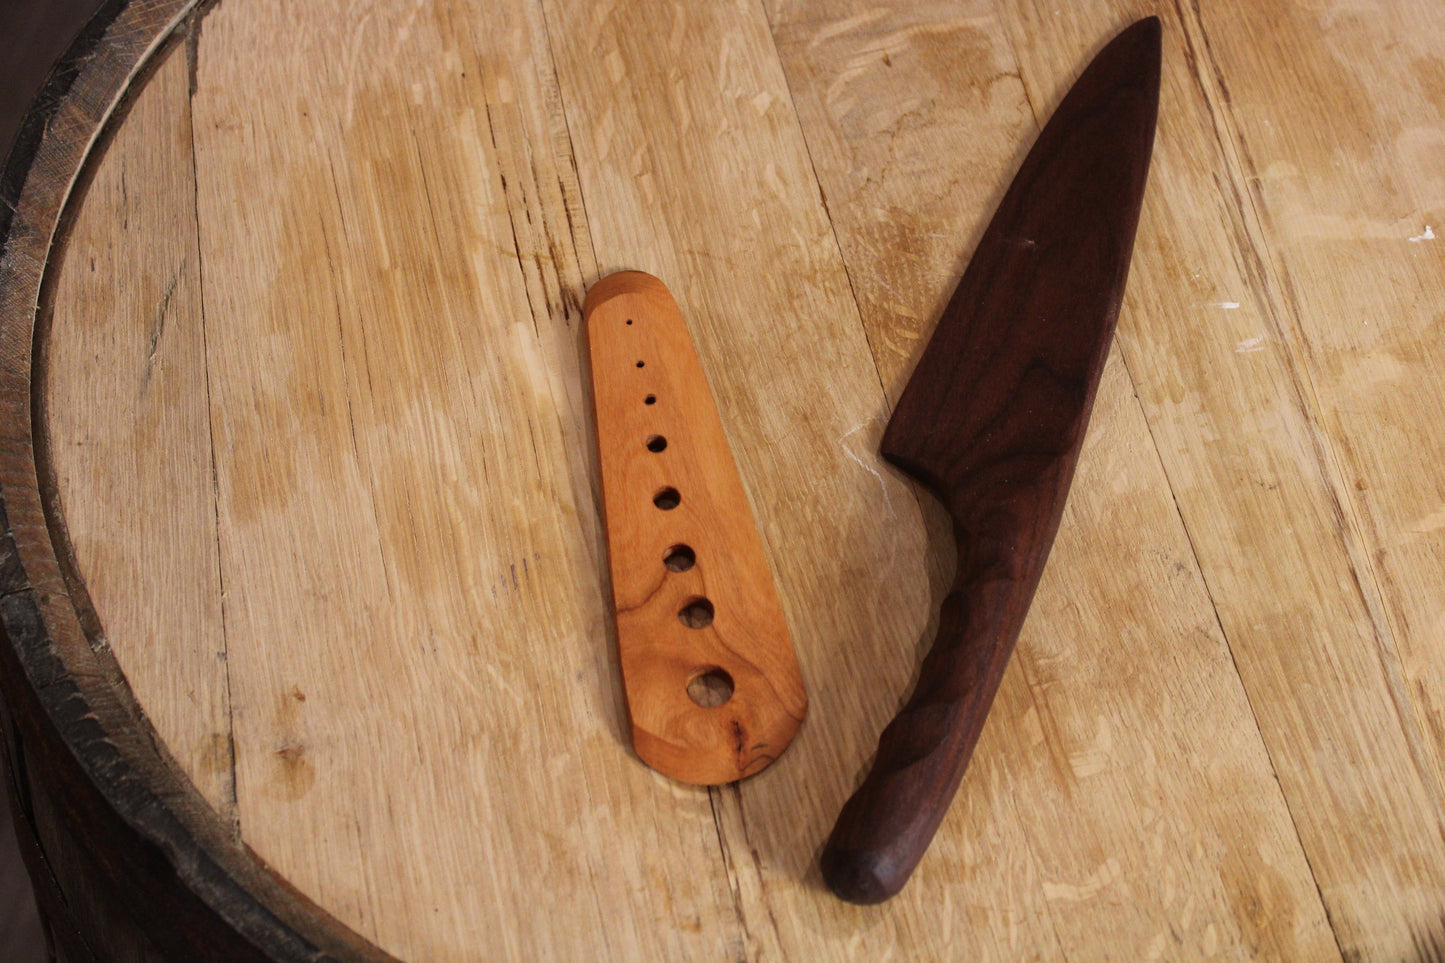 Multi-purpose Herb Tool / Gardening Tool / Herb Knife - Wooden - Cherry, Maple or Walnut - Good for Rosemary, Thyme & Leafy Greens (Sale Price: $47.59 CAD)